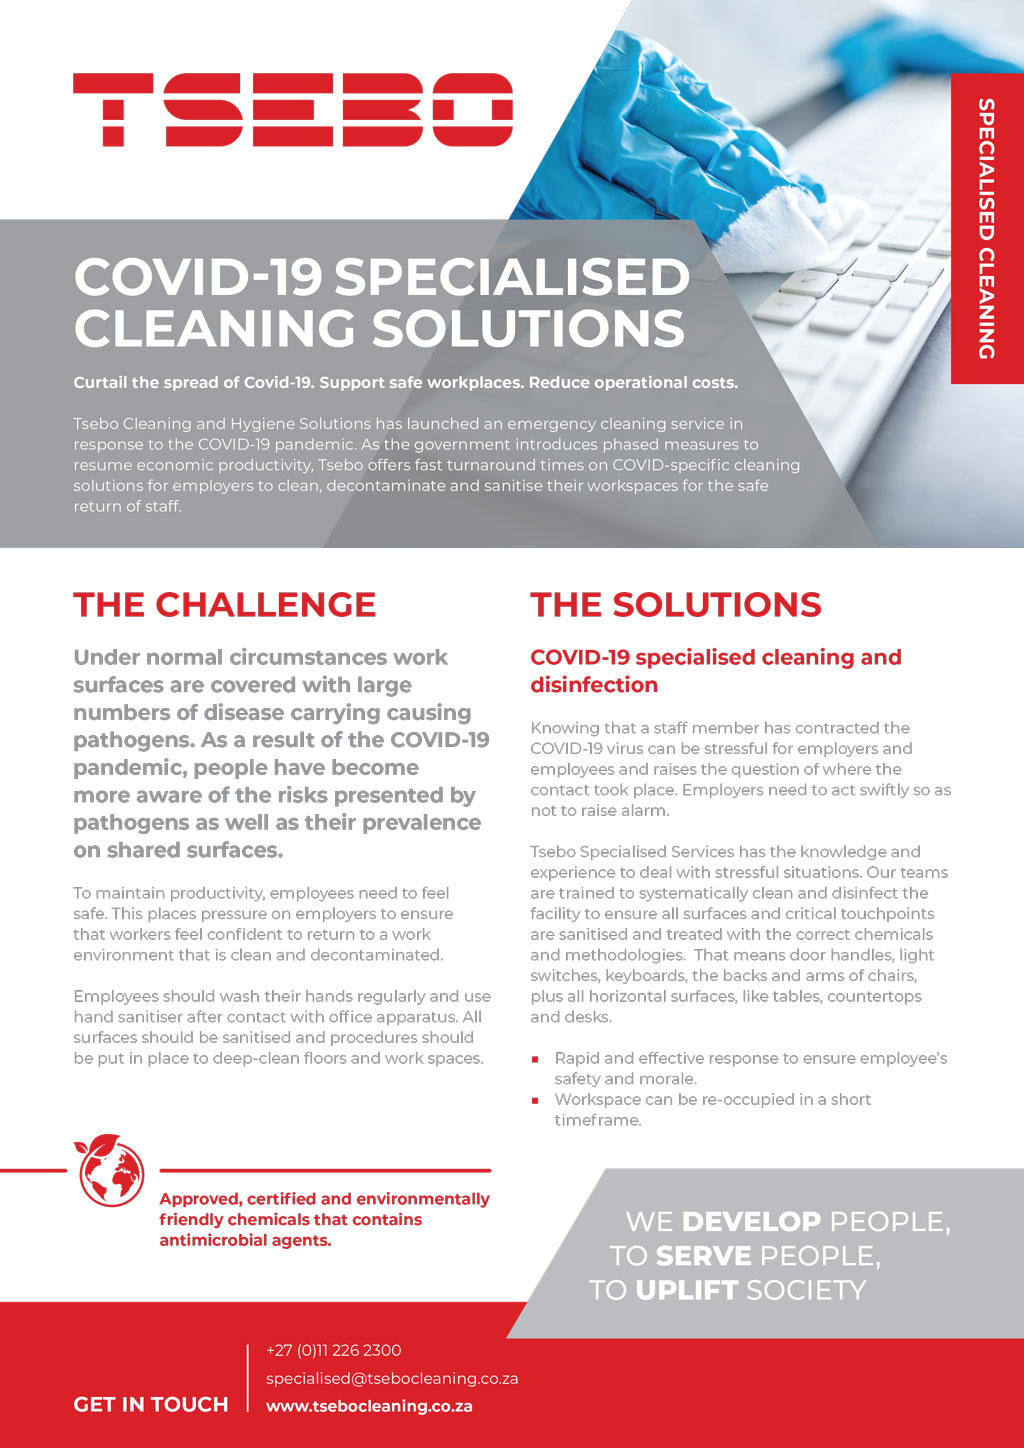 COVID-19 SPECIALISED CLEANING SOLUTIONS